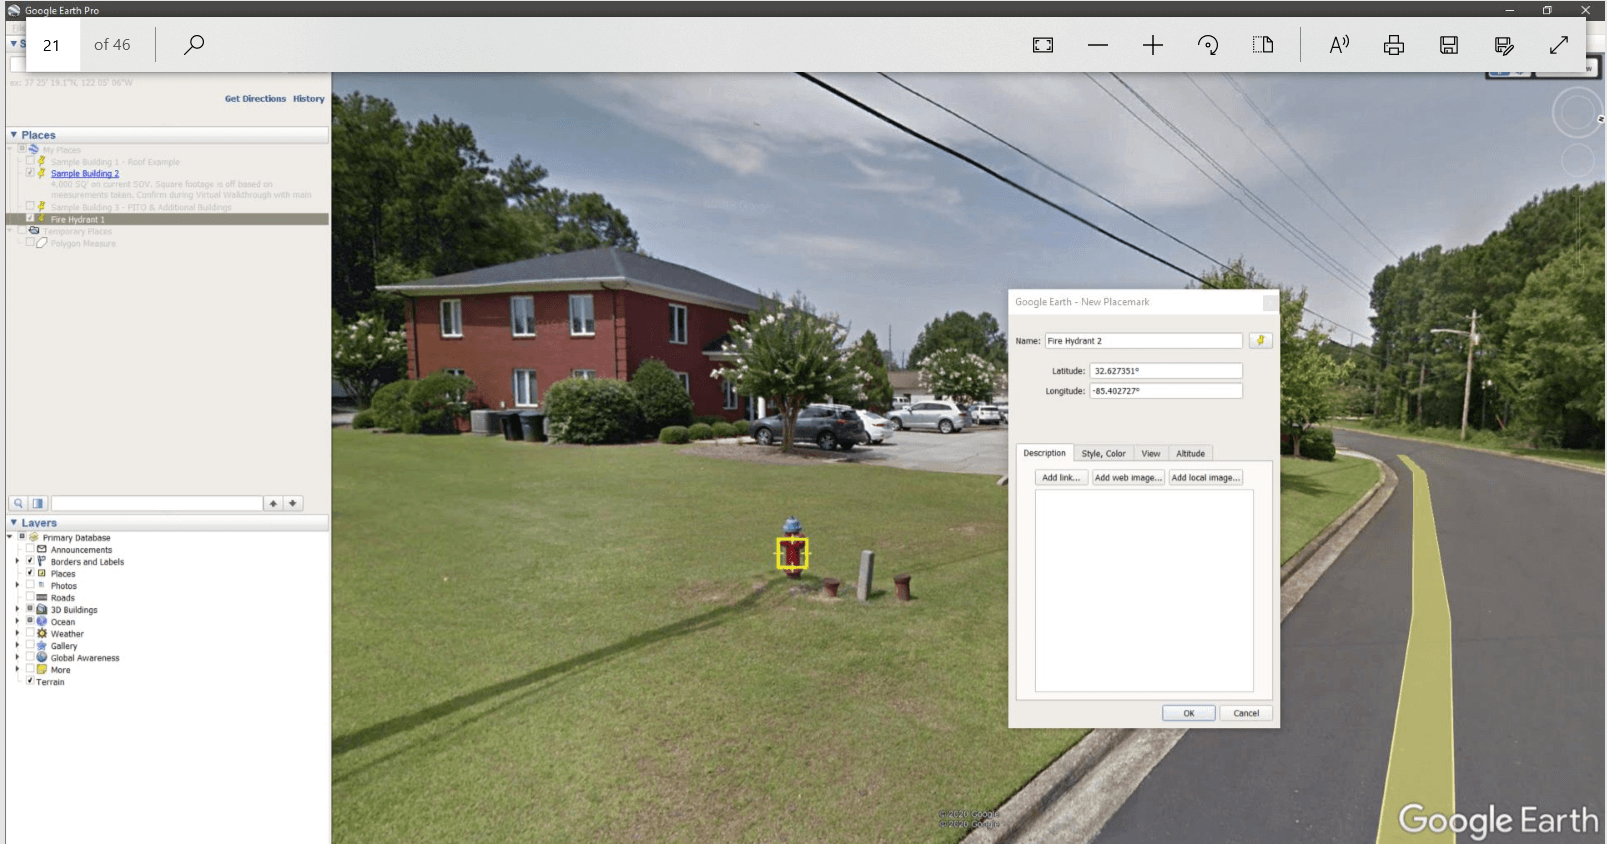 calculate distance to a fire hydrant